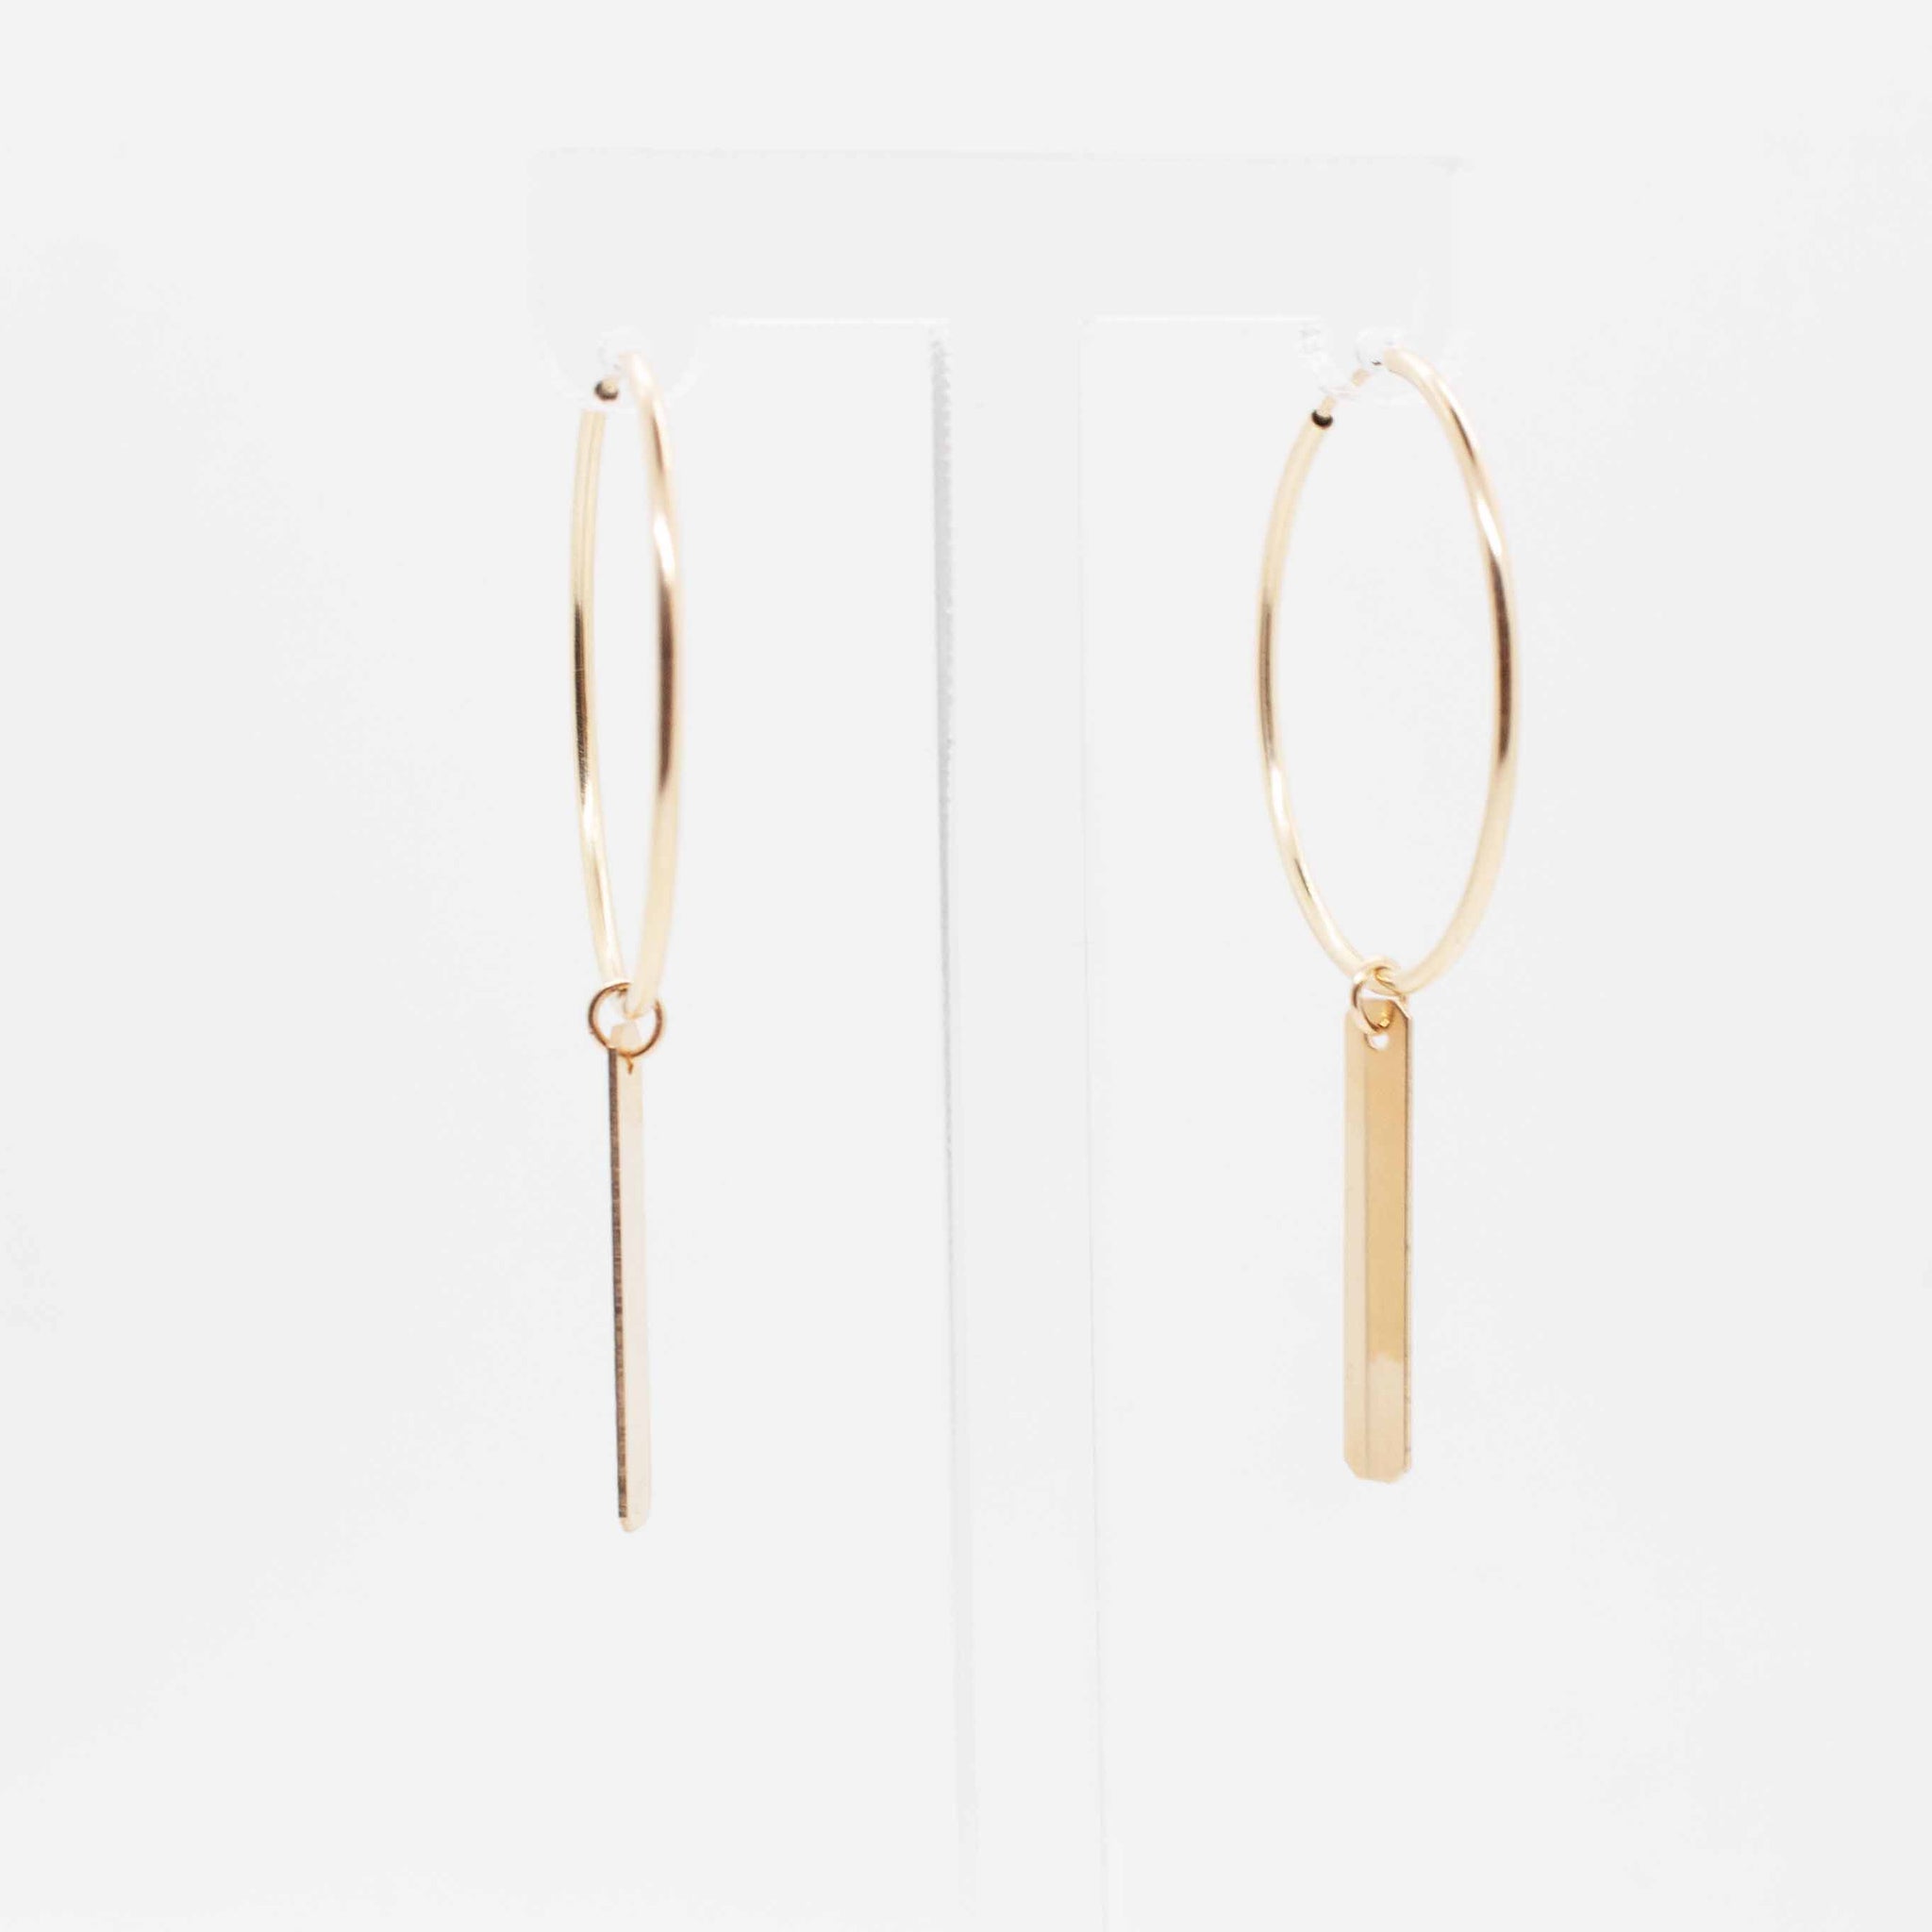 A sleek and sophisticated take on your everyday gold hoop, these are some sexy beasts.  30mm gold filled hoop earrings with gold tag charms. Made in Toronto.